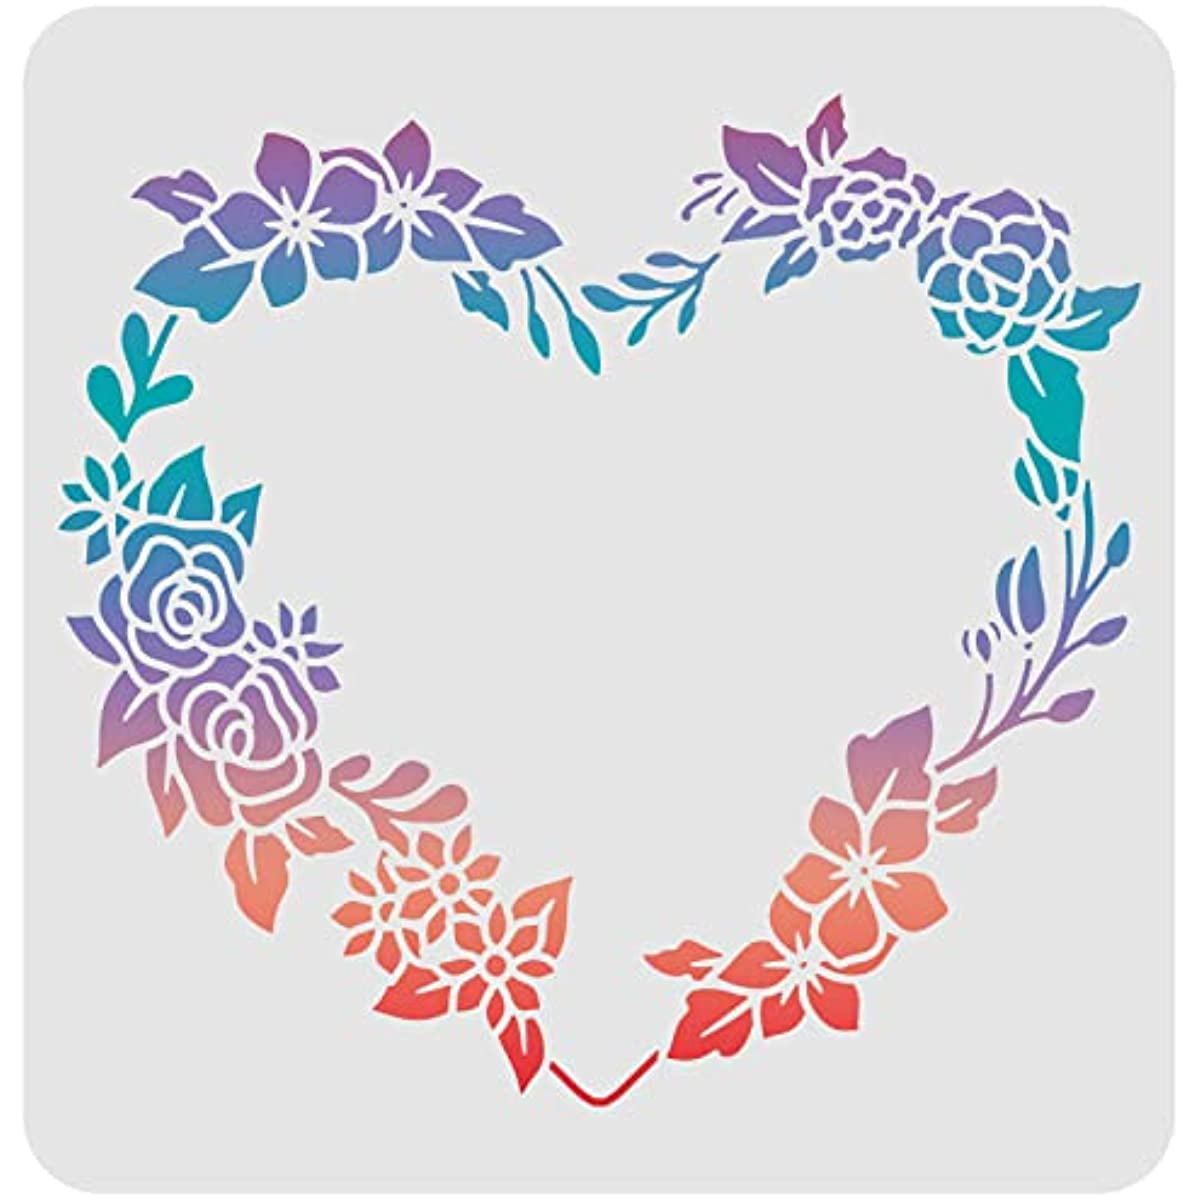 HOWAF 11pcs Flower Love Heart Stencils for Craft Cards Scrapbooking  Valentine Wedding, Plastic Reusable Stencils Templates for Kids Teen  Painting